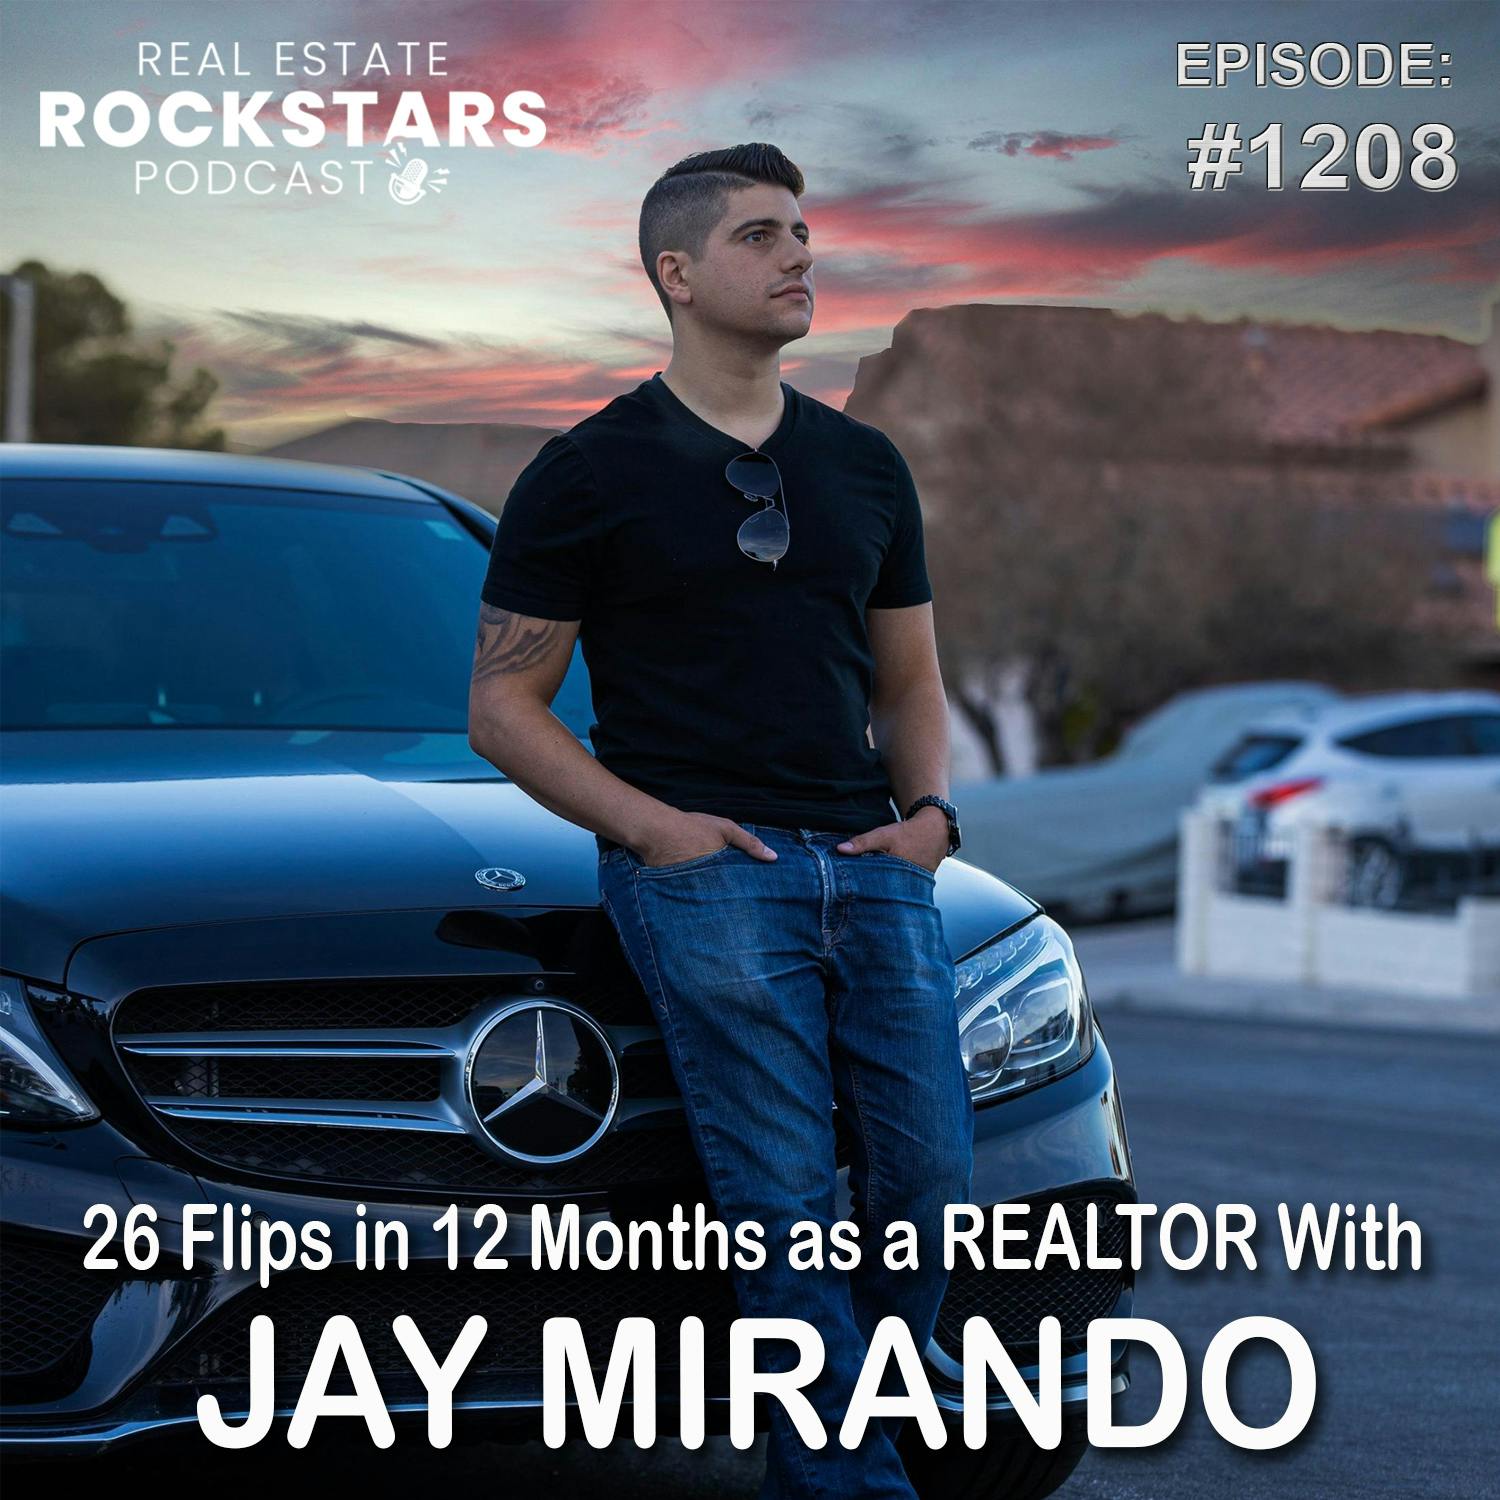 1208: 26 Flips in 12 Months as a REALTOR With Jay Mirando